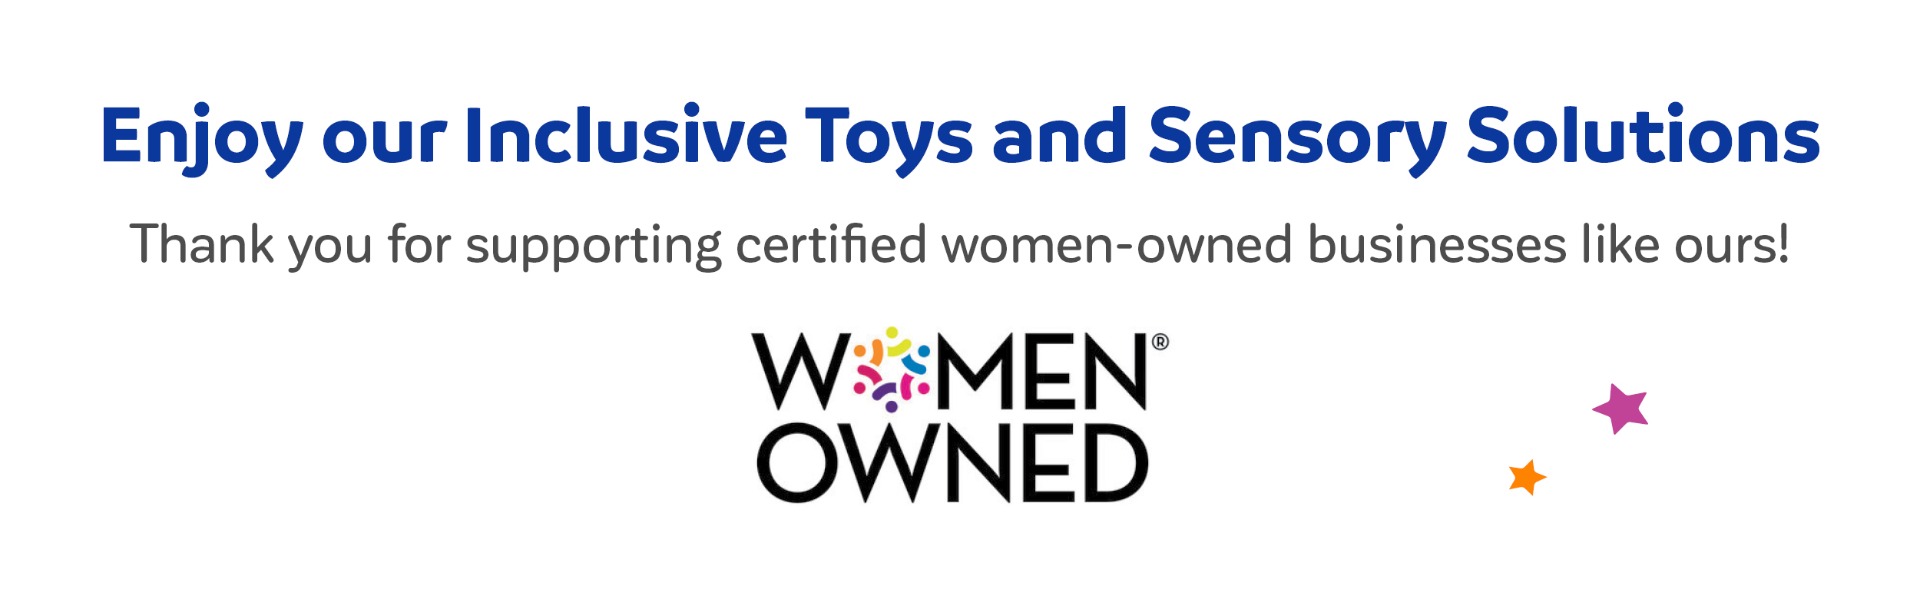 Thank you for supporting certified women-owned businesses like ours!